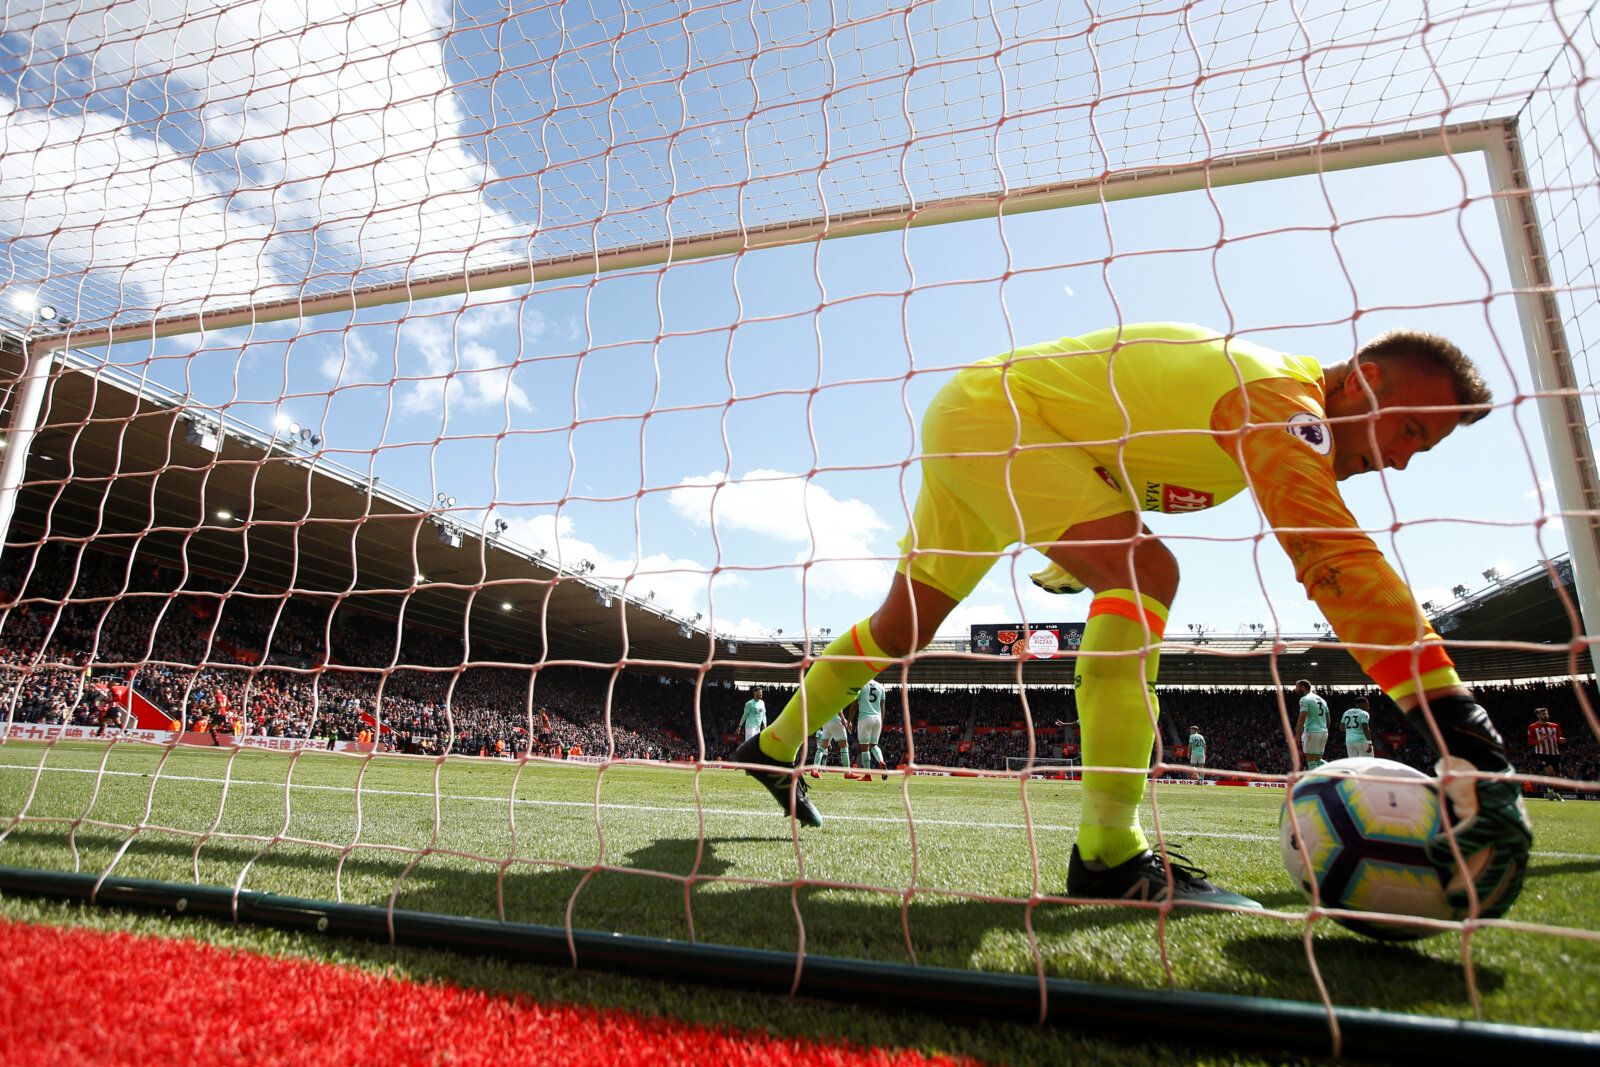 Soccer Football - Premier League - Southampton v AFC Bournemouth - St Mary's Stadium,  Southampton, Britain - April 27, 2019  Bournemouth's Artur Boruc collects the ball after Southampton's Shane Long scores their first goal    REUTERS/Peter Nicholls  EDITORIAL USE ONLY. No use with unauthorized audio, video, data, fixture lists, club/league logos or 